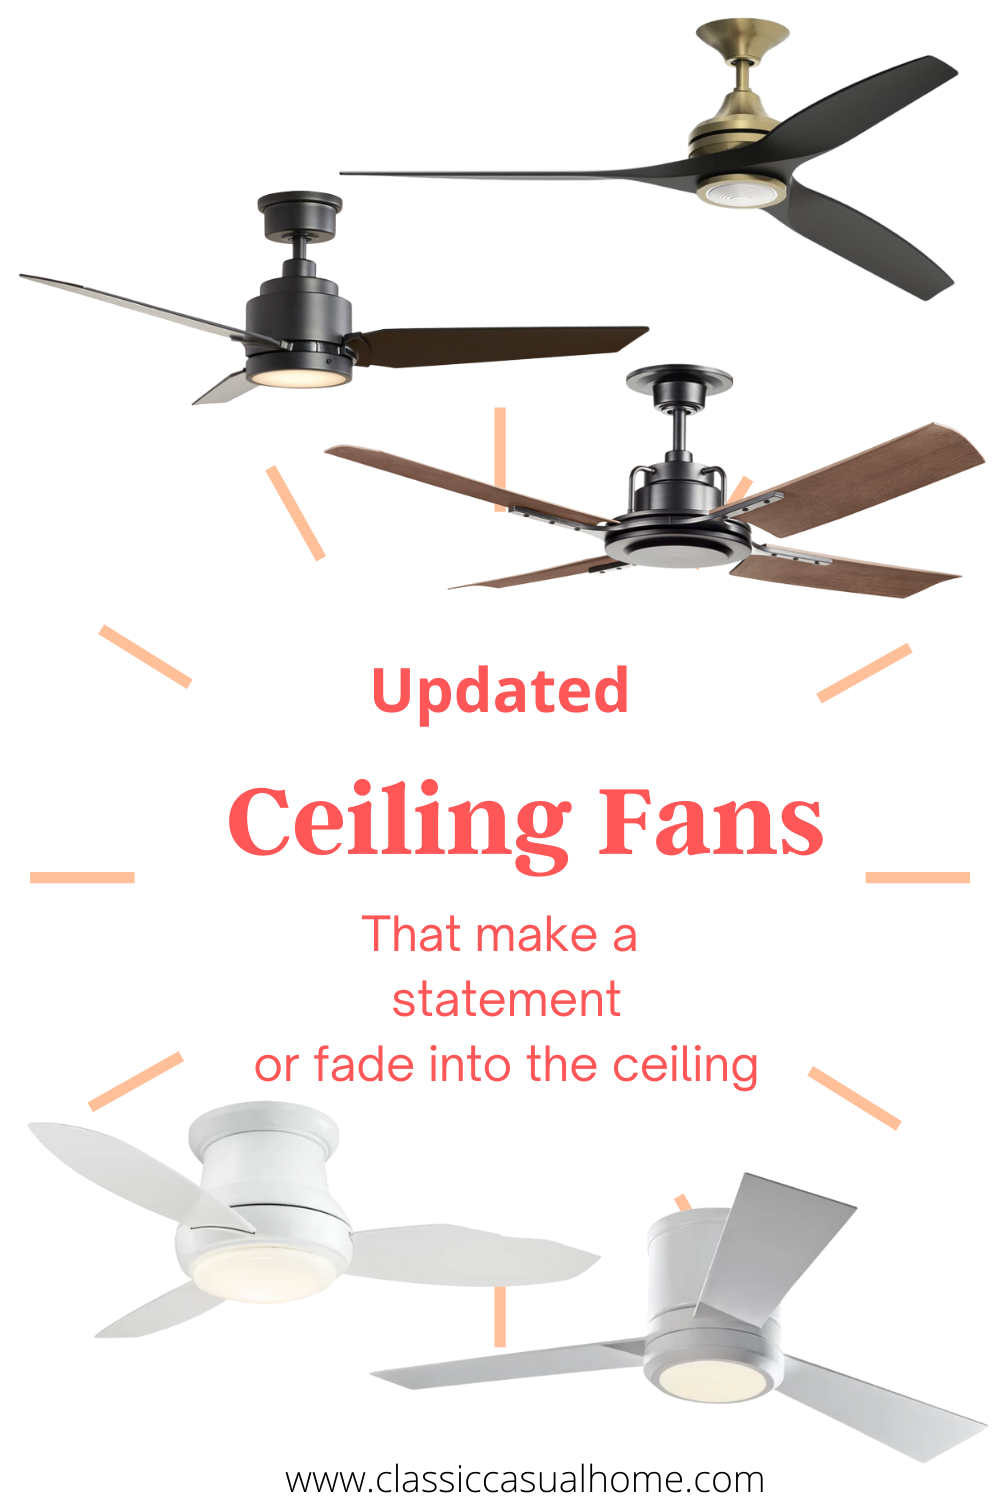 Attractive and functional ceiling fans